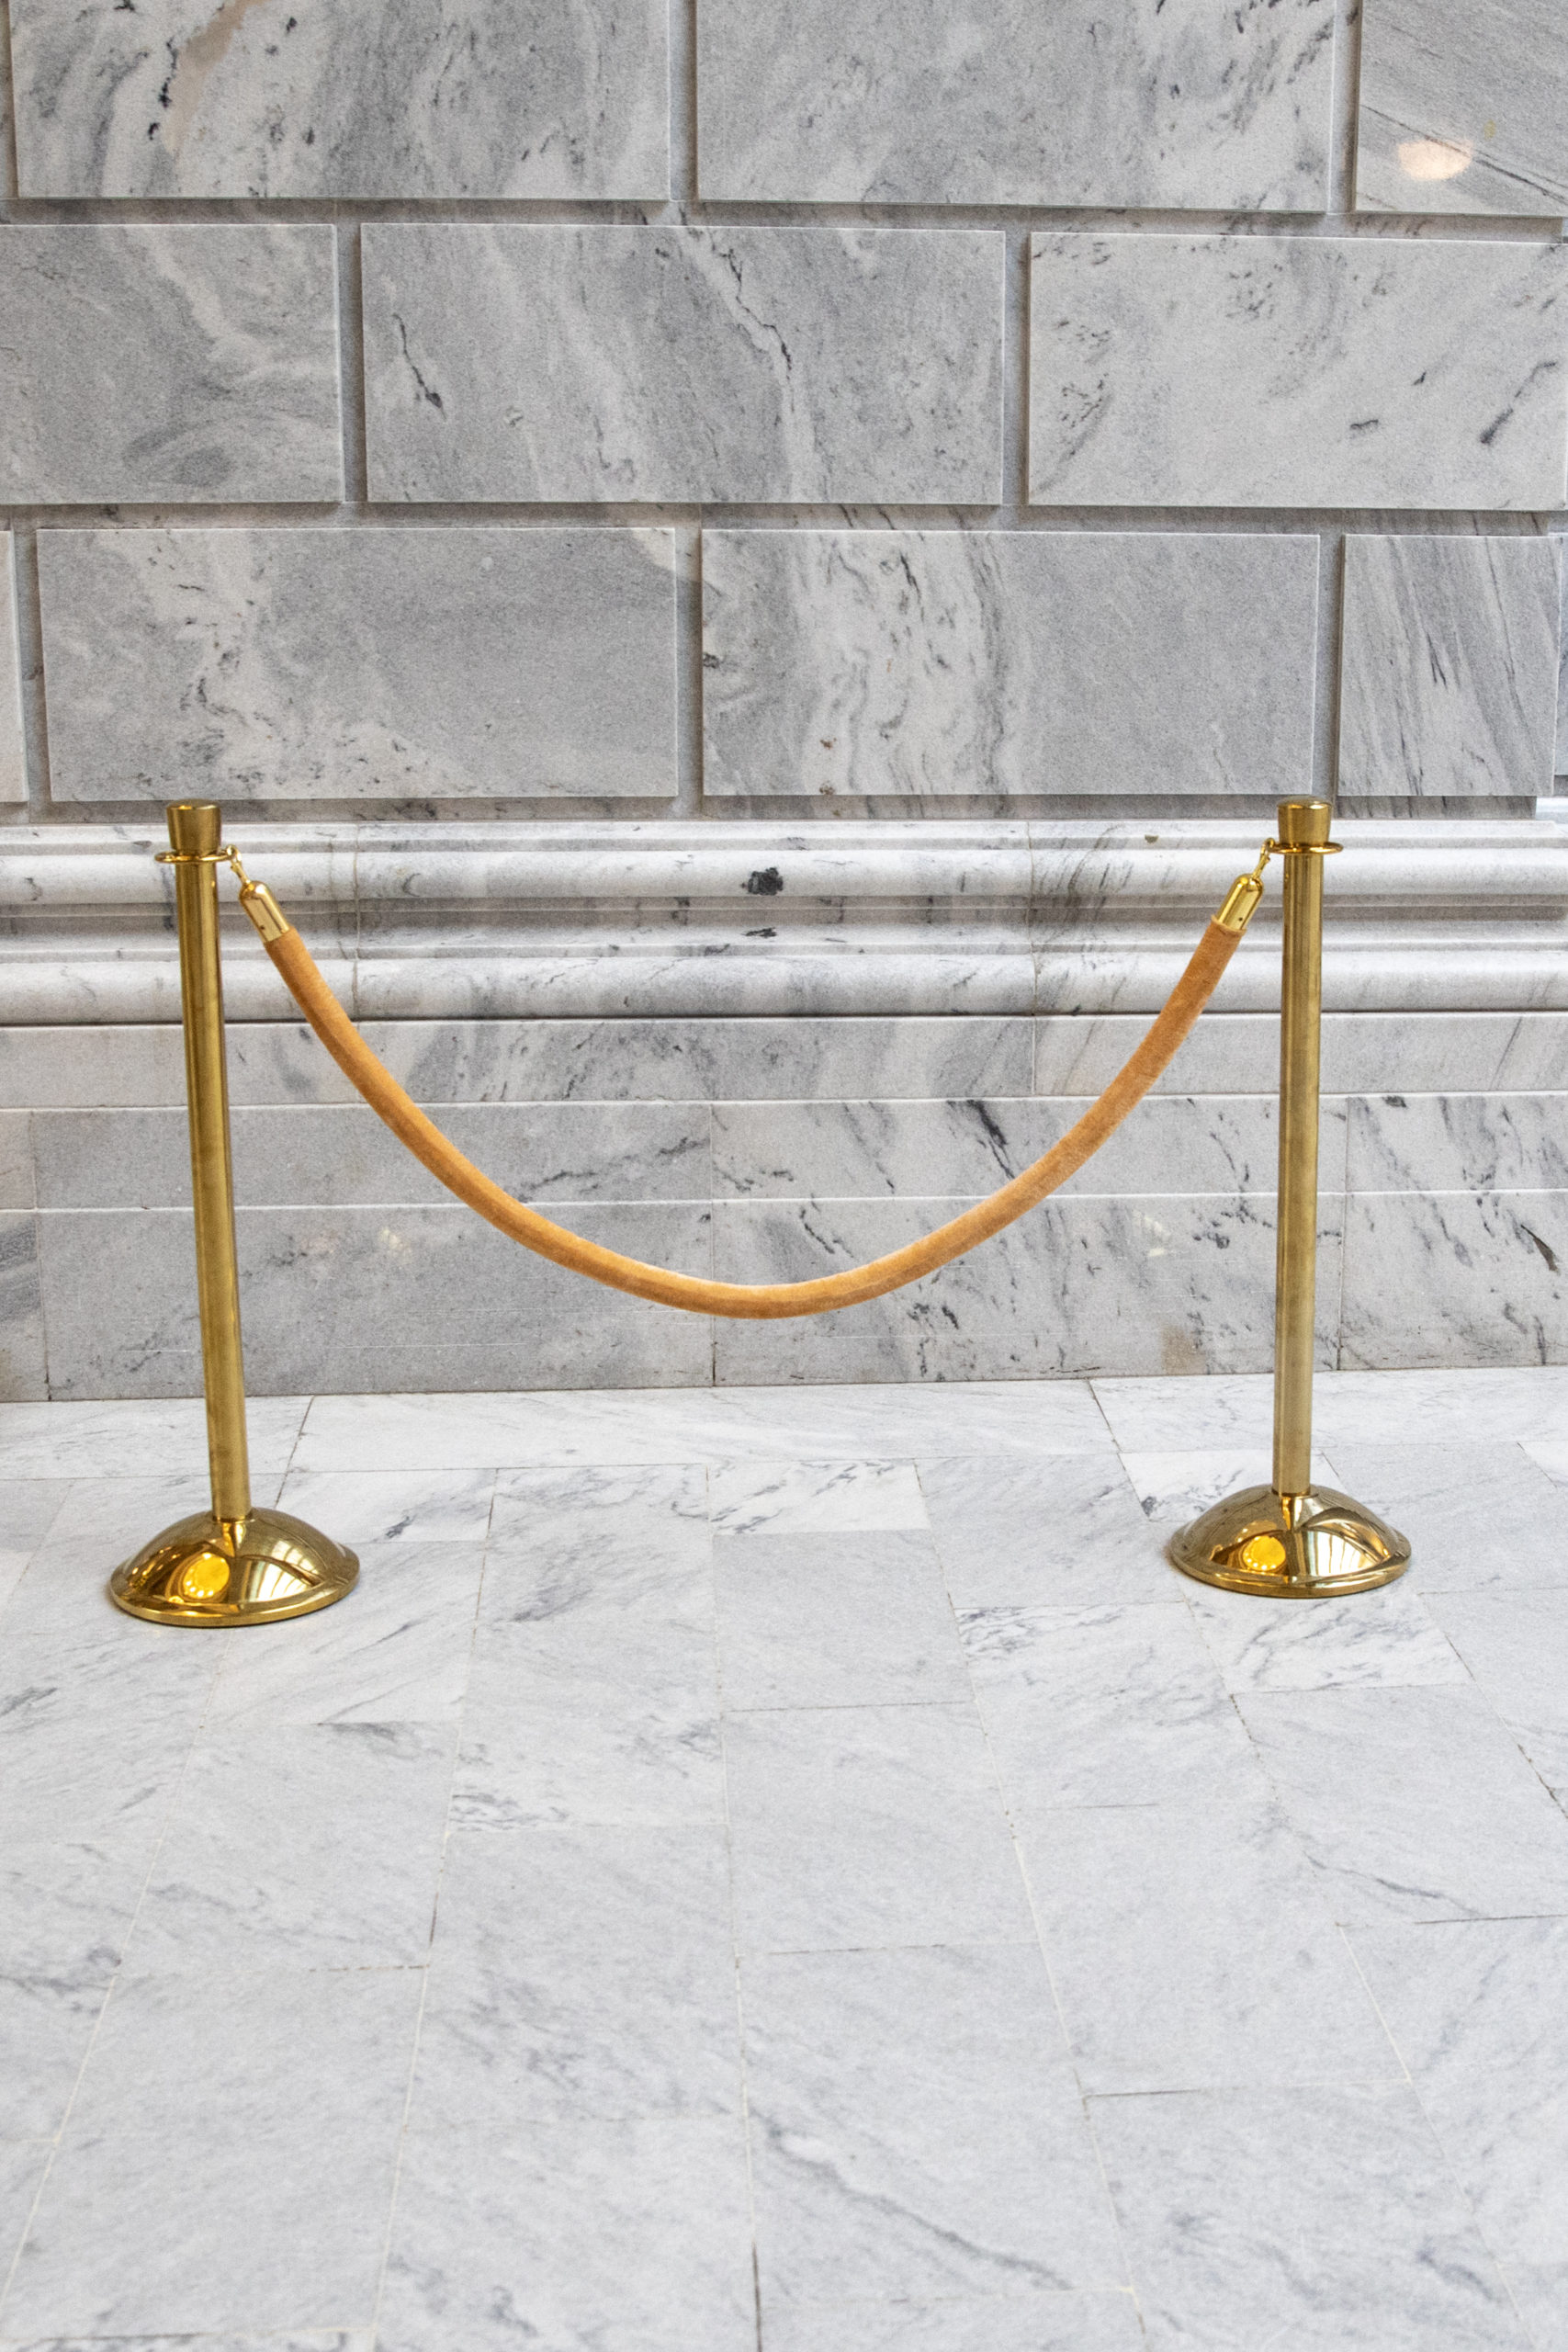 Gold stanchions on marble backdrop